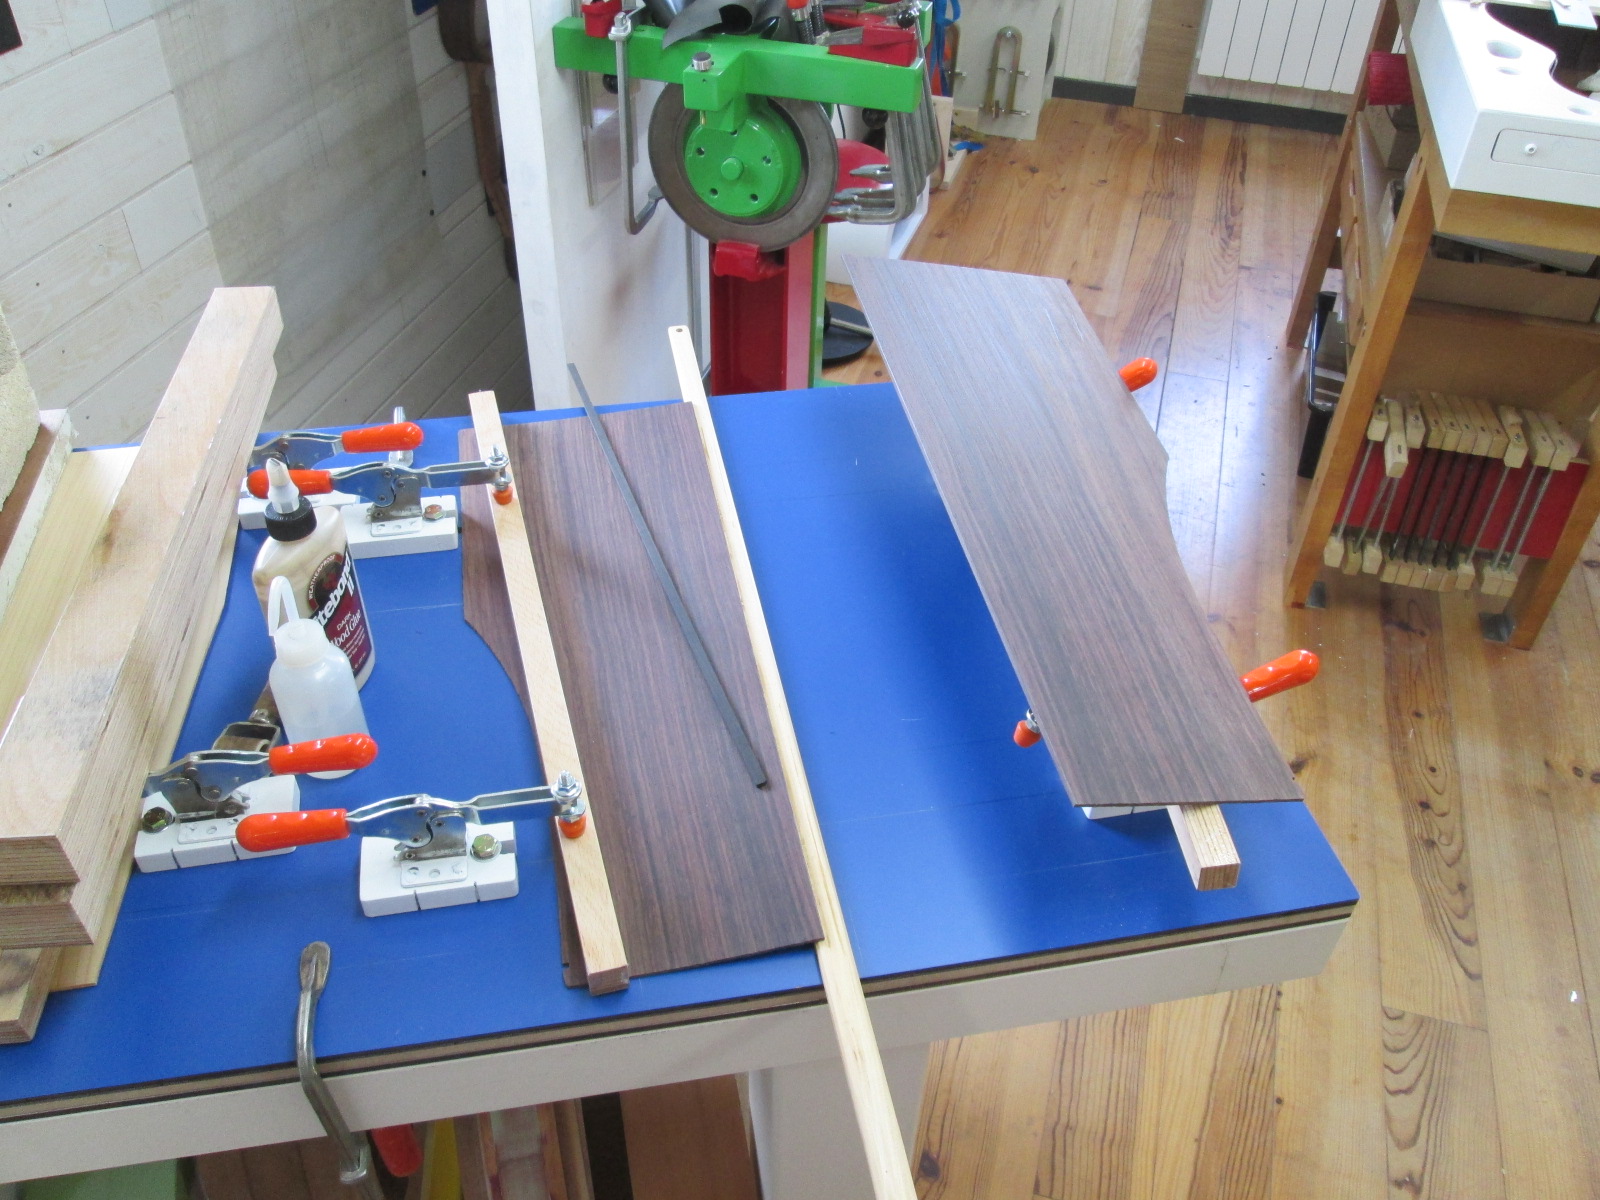 Gluing together two half-backs with the central binding